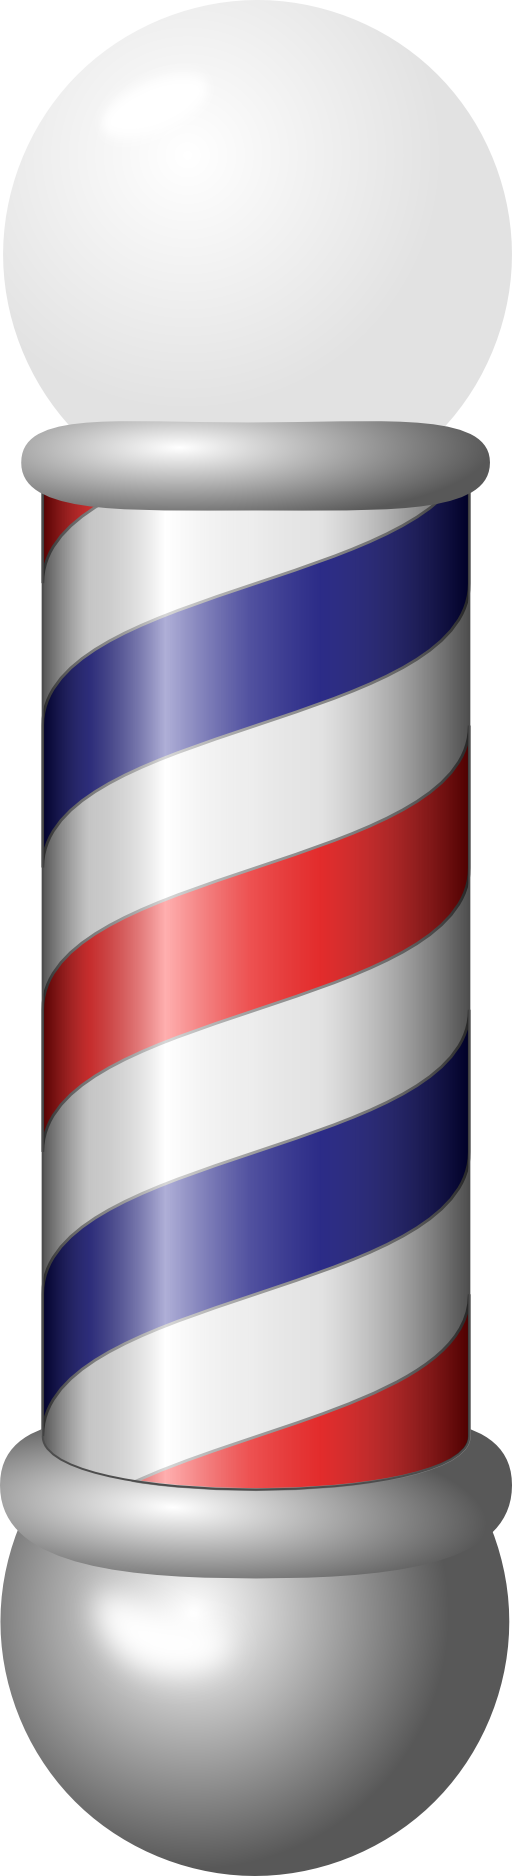 Barber Pole Clipart   I2clipart   Royalty Free Public Domain Clipart